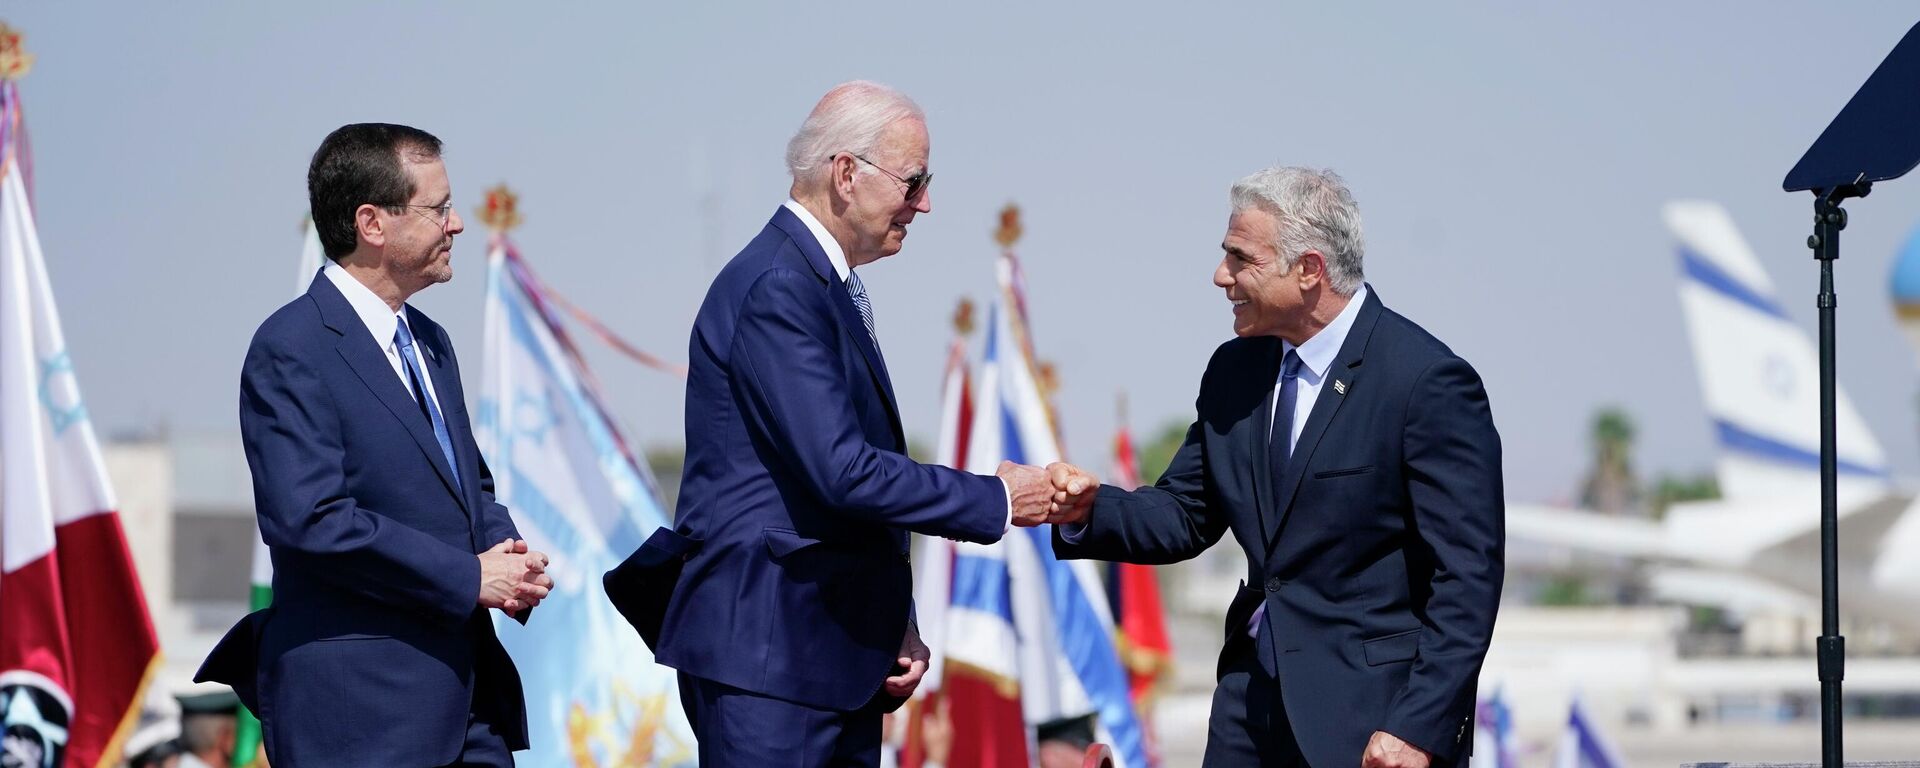 President Joe Biden is greeted by Israeli Prime Minister Yair Lapid, right and President Isaac Herzog, left, as they participate in an arrival ceremony after Biden arrived at Ben Gurion Airport, Wednesday, July 13, 2022, in Tel Aviv.  - Sputnik International, 1920, 15.07.2022